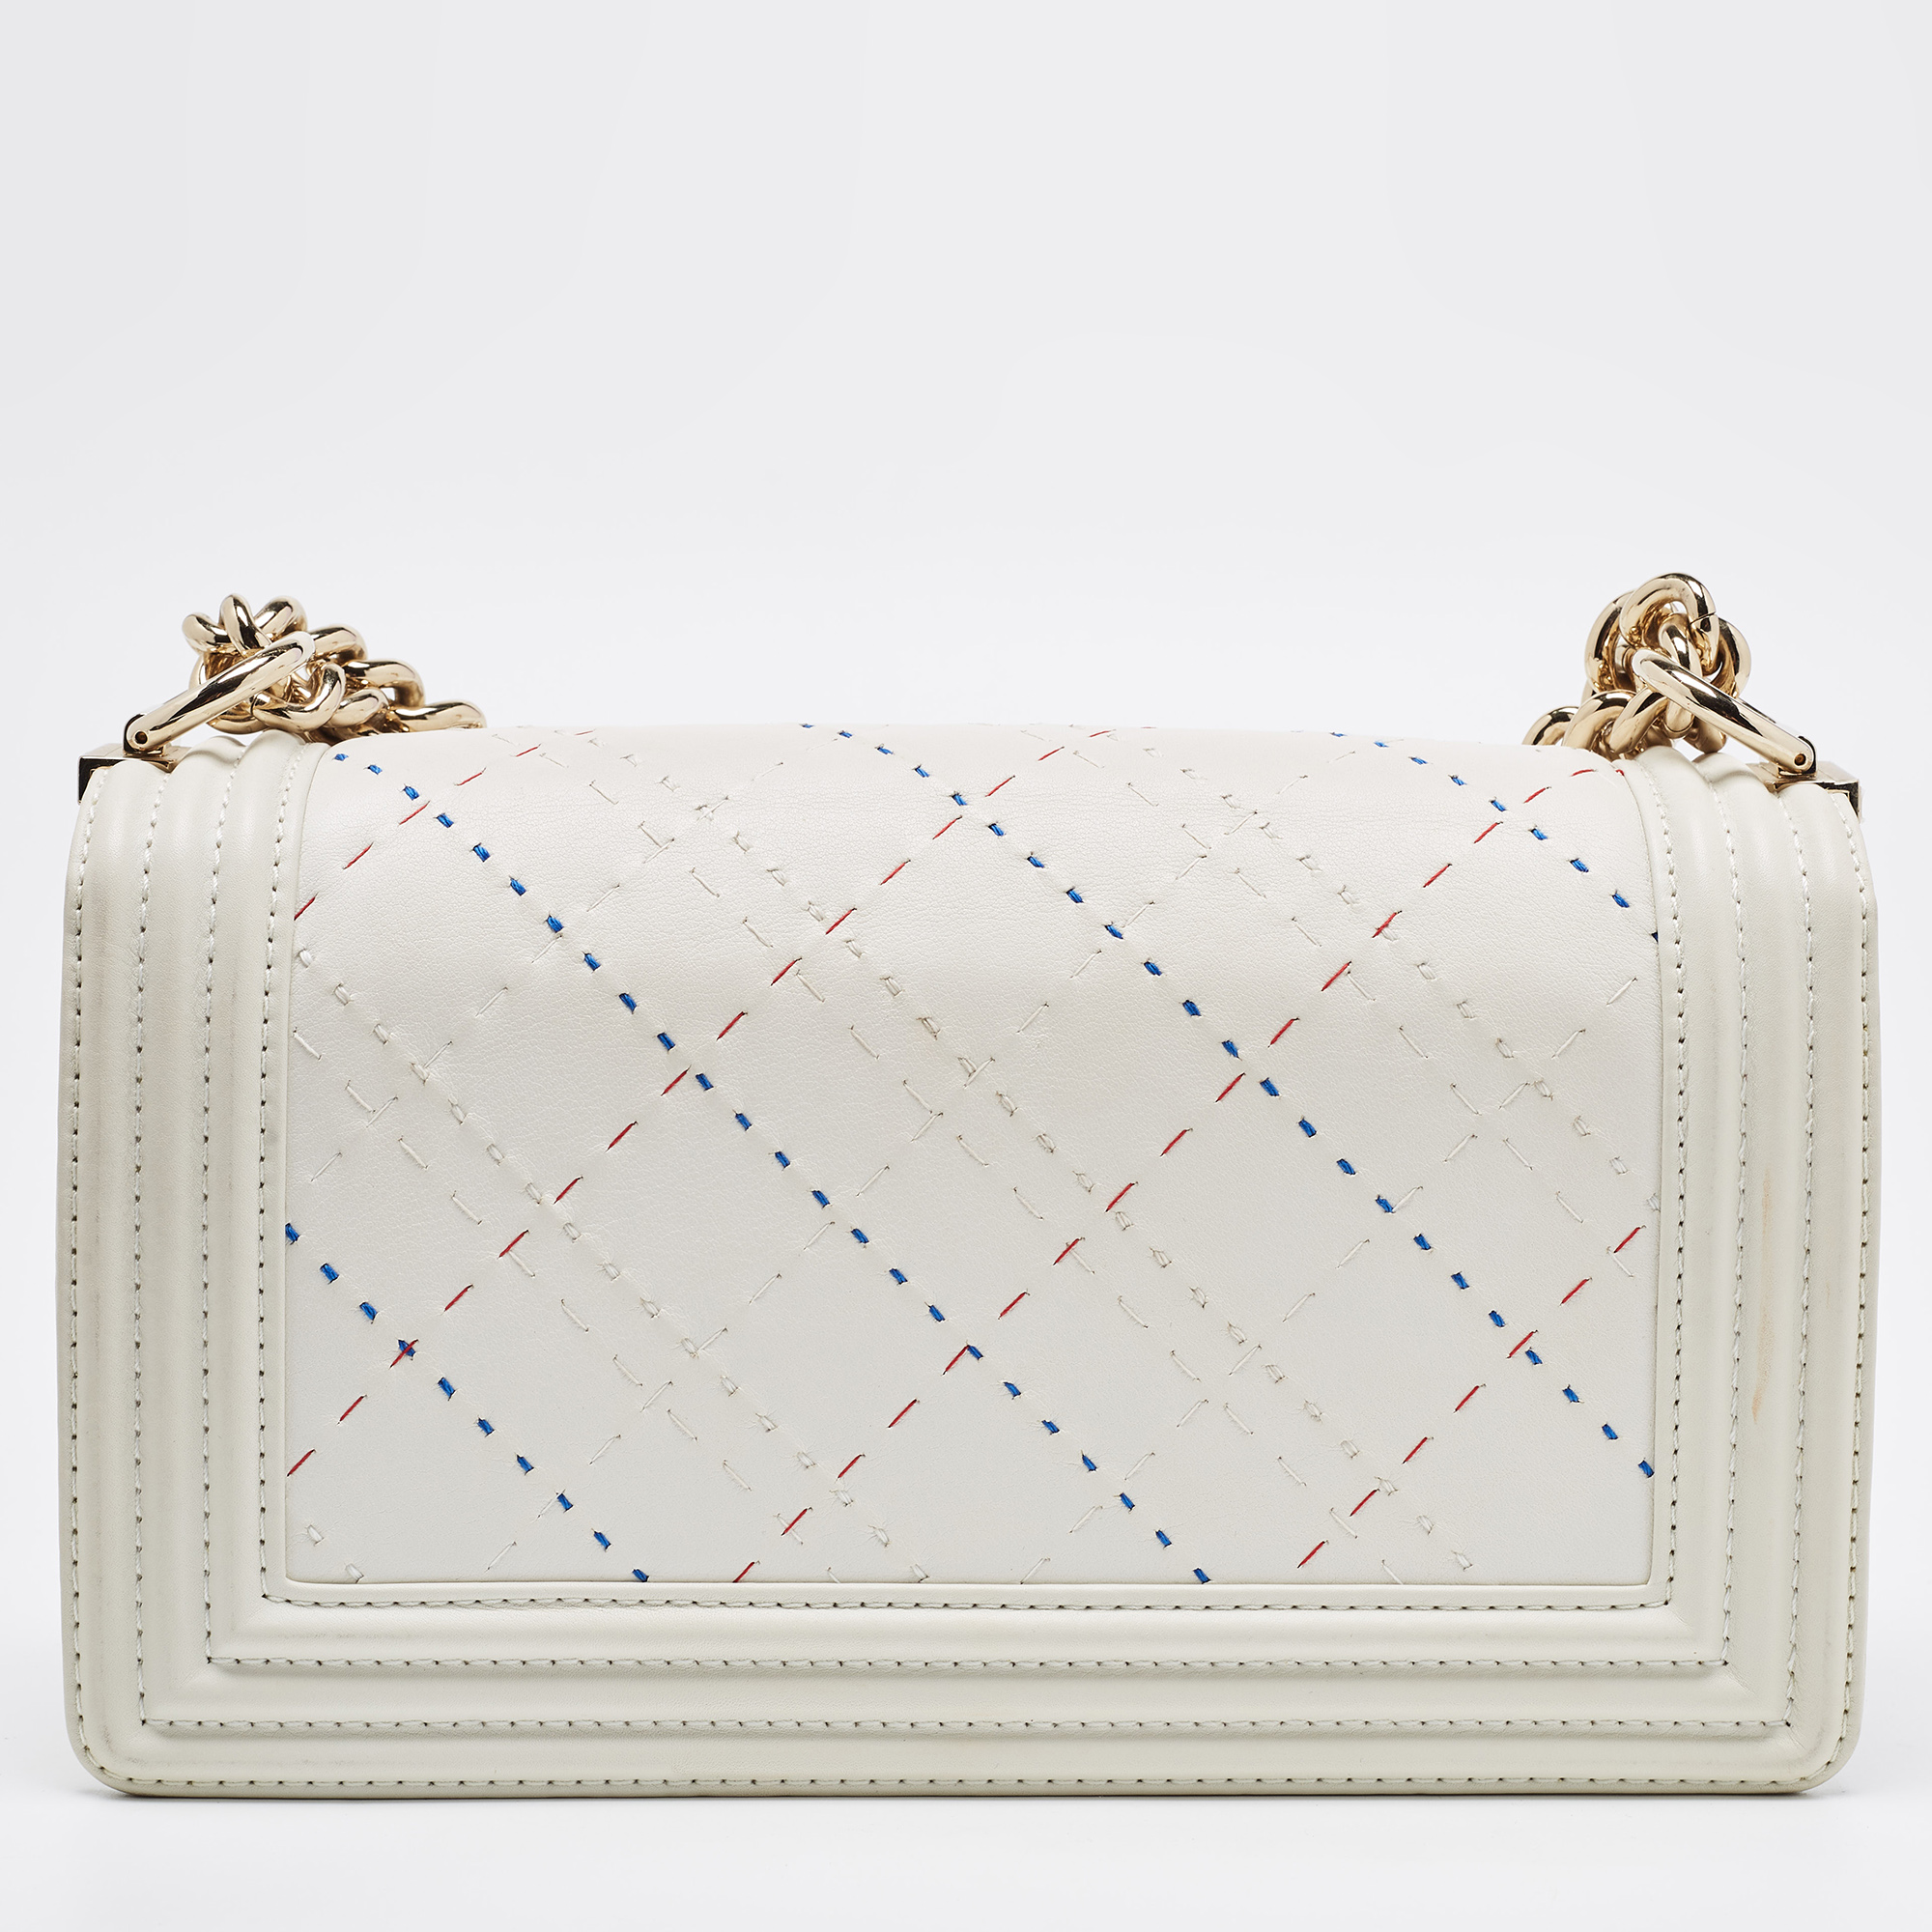 Chanel White Stitch Quilted Leather Medium Boy Flap Bag